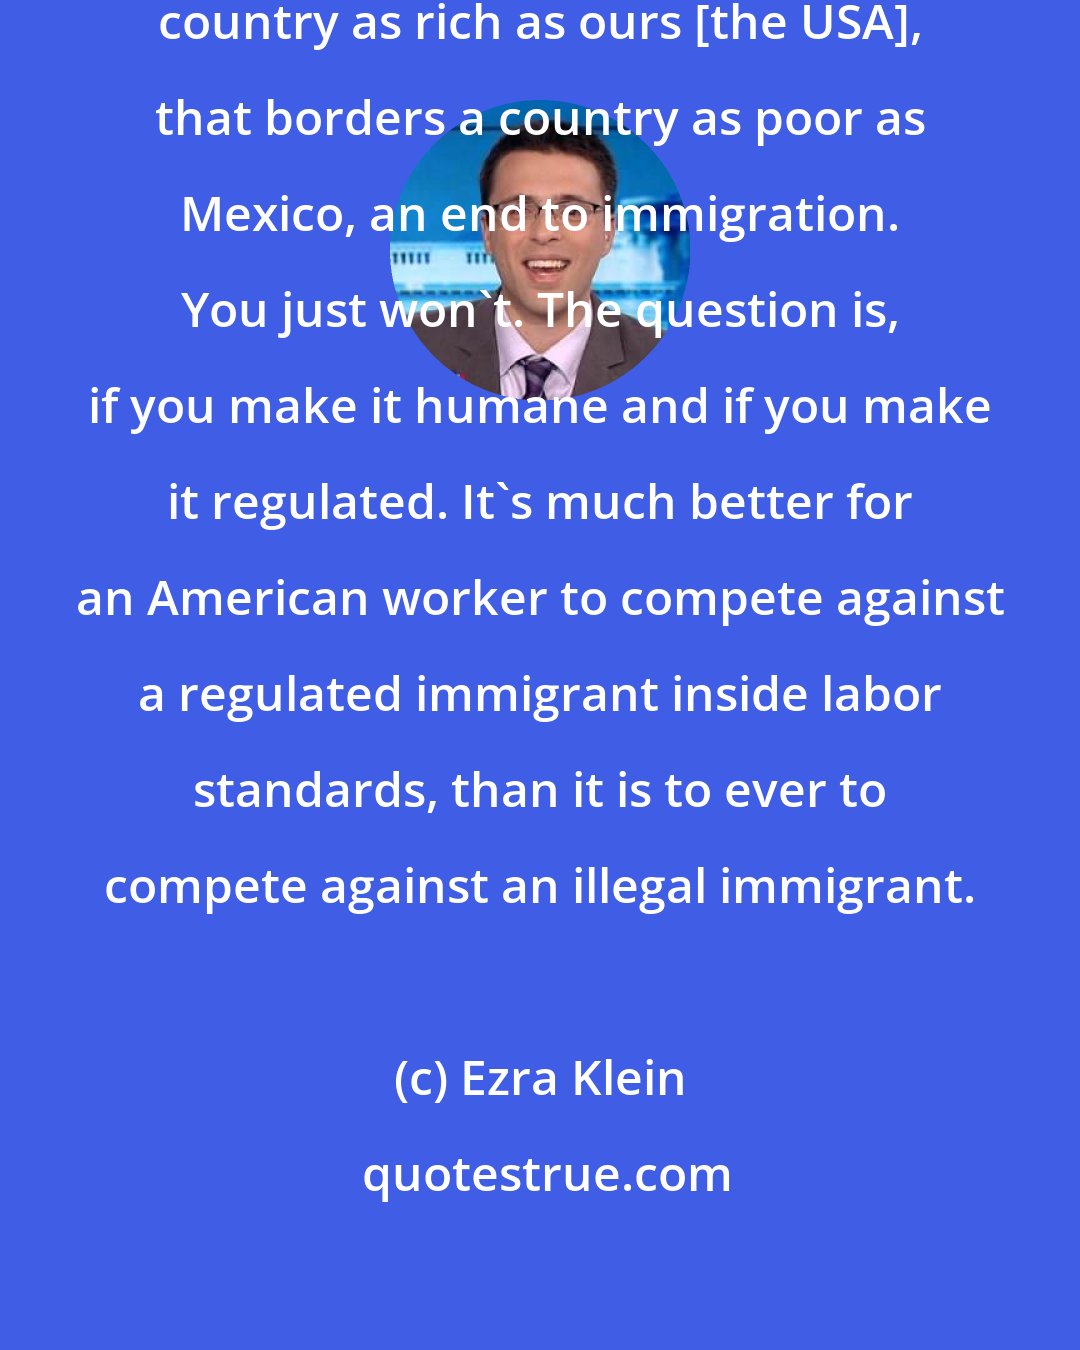 Ezra Klein: You are never going to have, in a country as rich as ours [the USA], that borders a country as poor as Mexico, an end to immigration. You just won't. The question is, if you make it humane and if you make it regulated. It's much better for an American worker to compete against a regulated immigrant inside labor standards, than it is to ever to compete against an illegal immigrant.